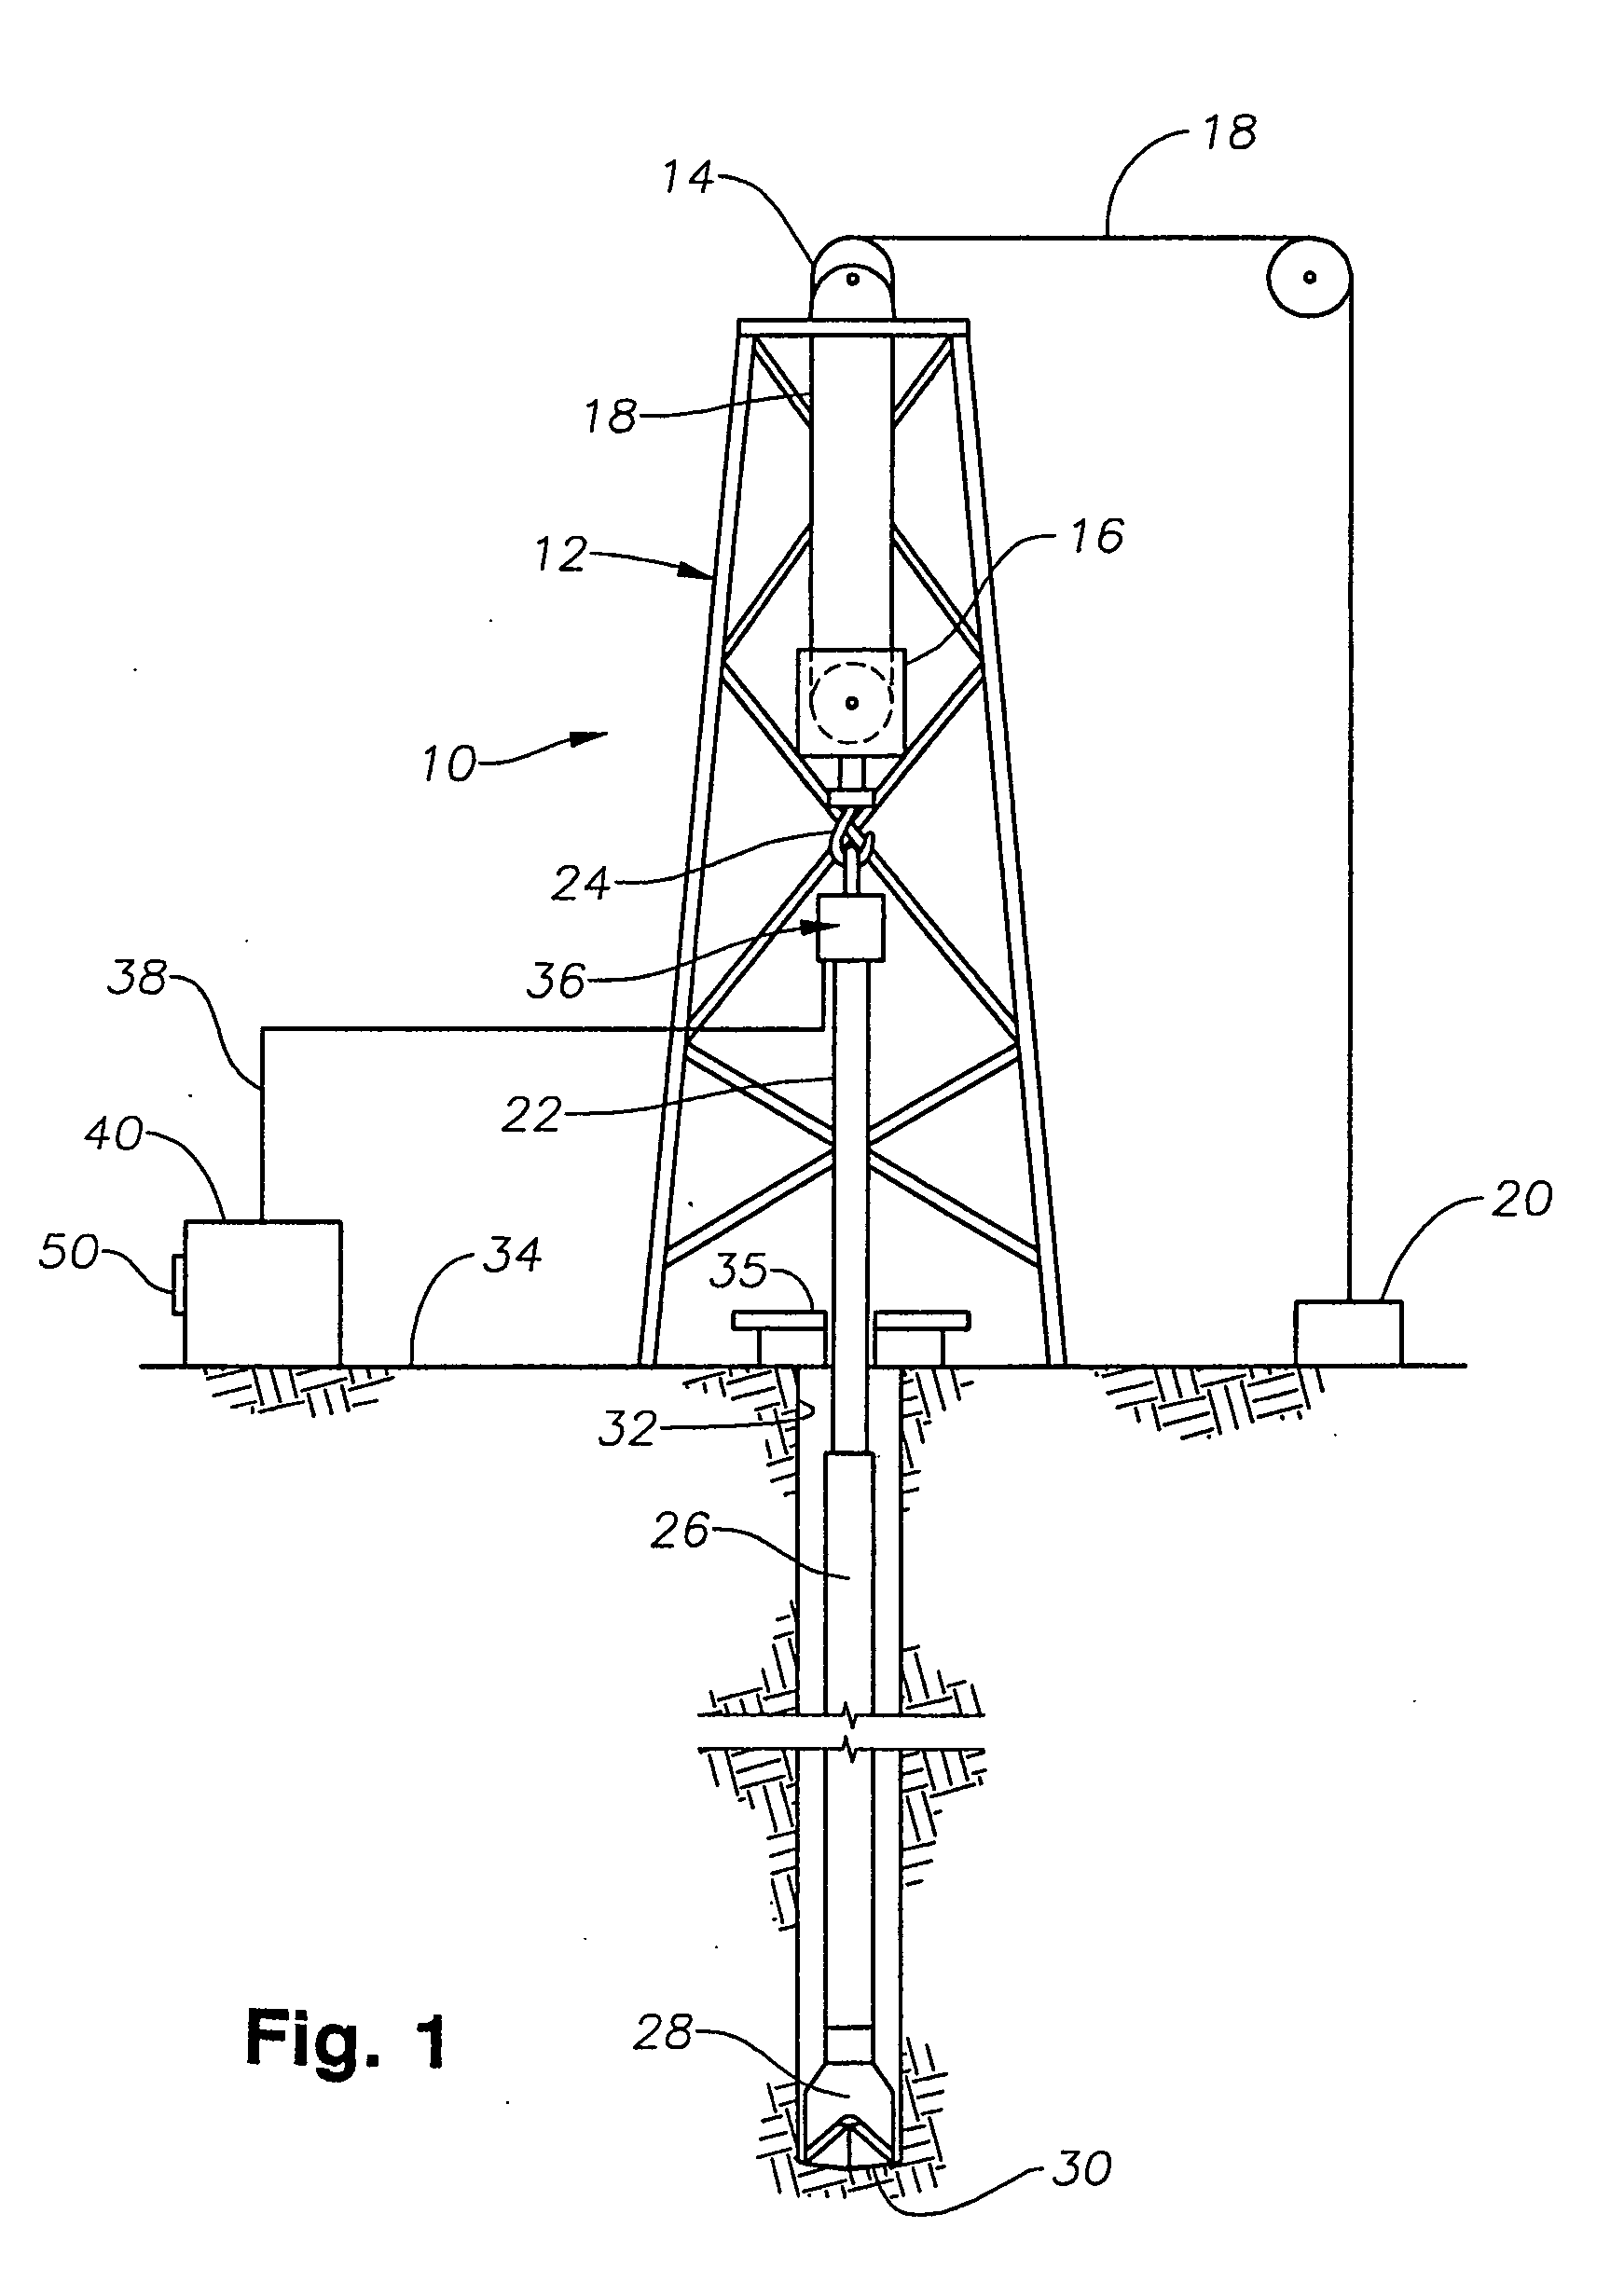 Autoreaming systems and methods